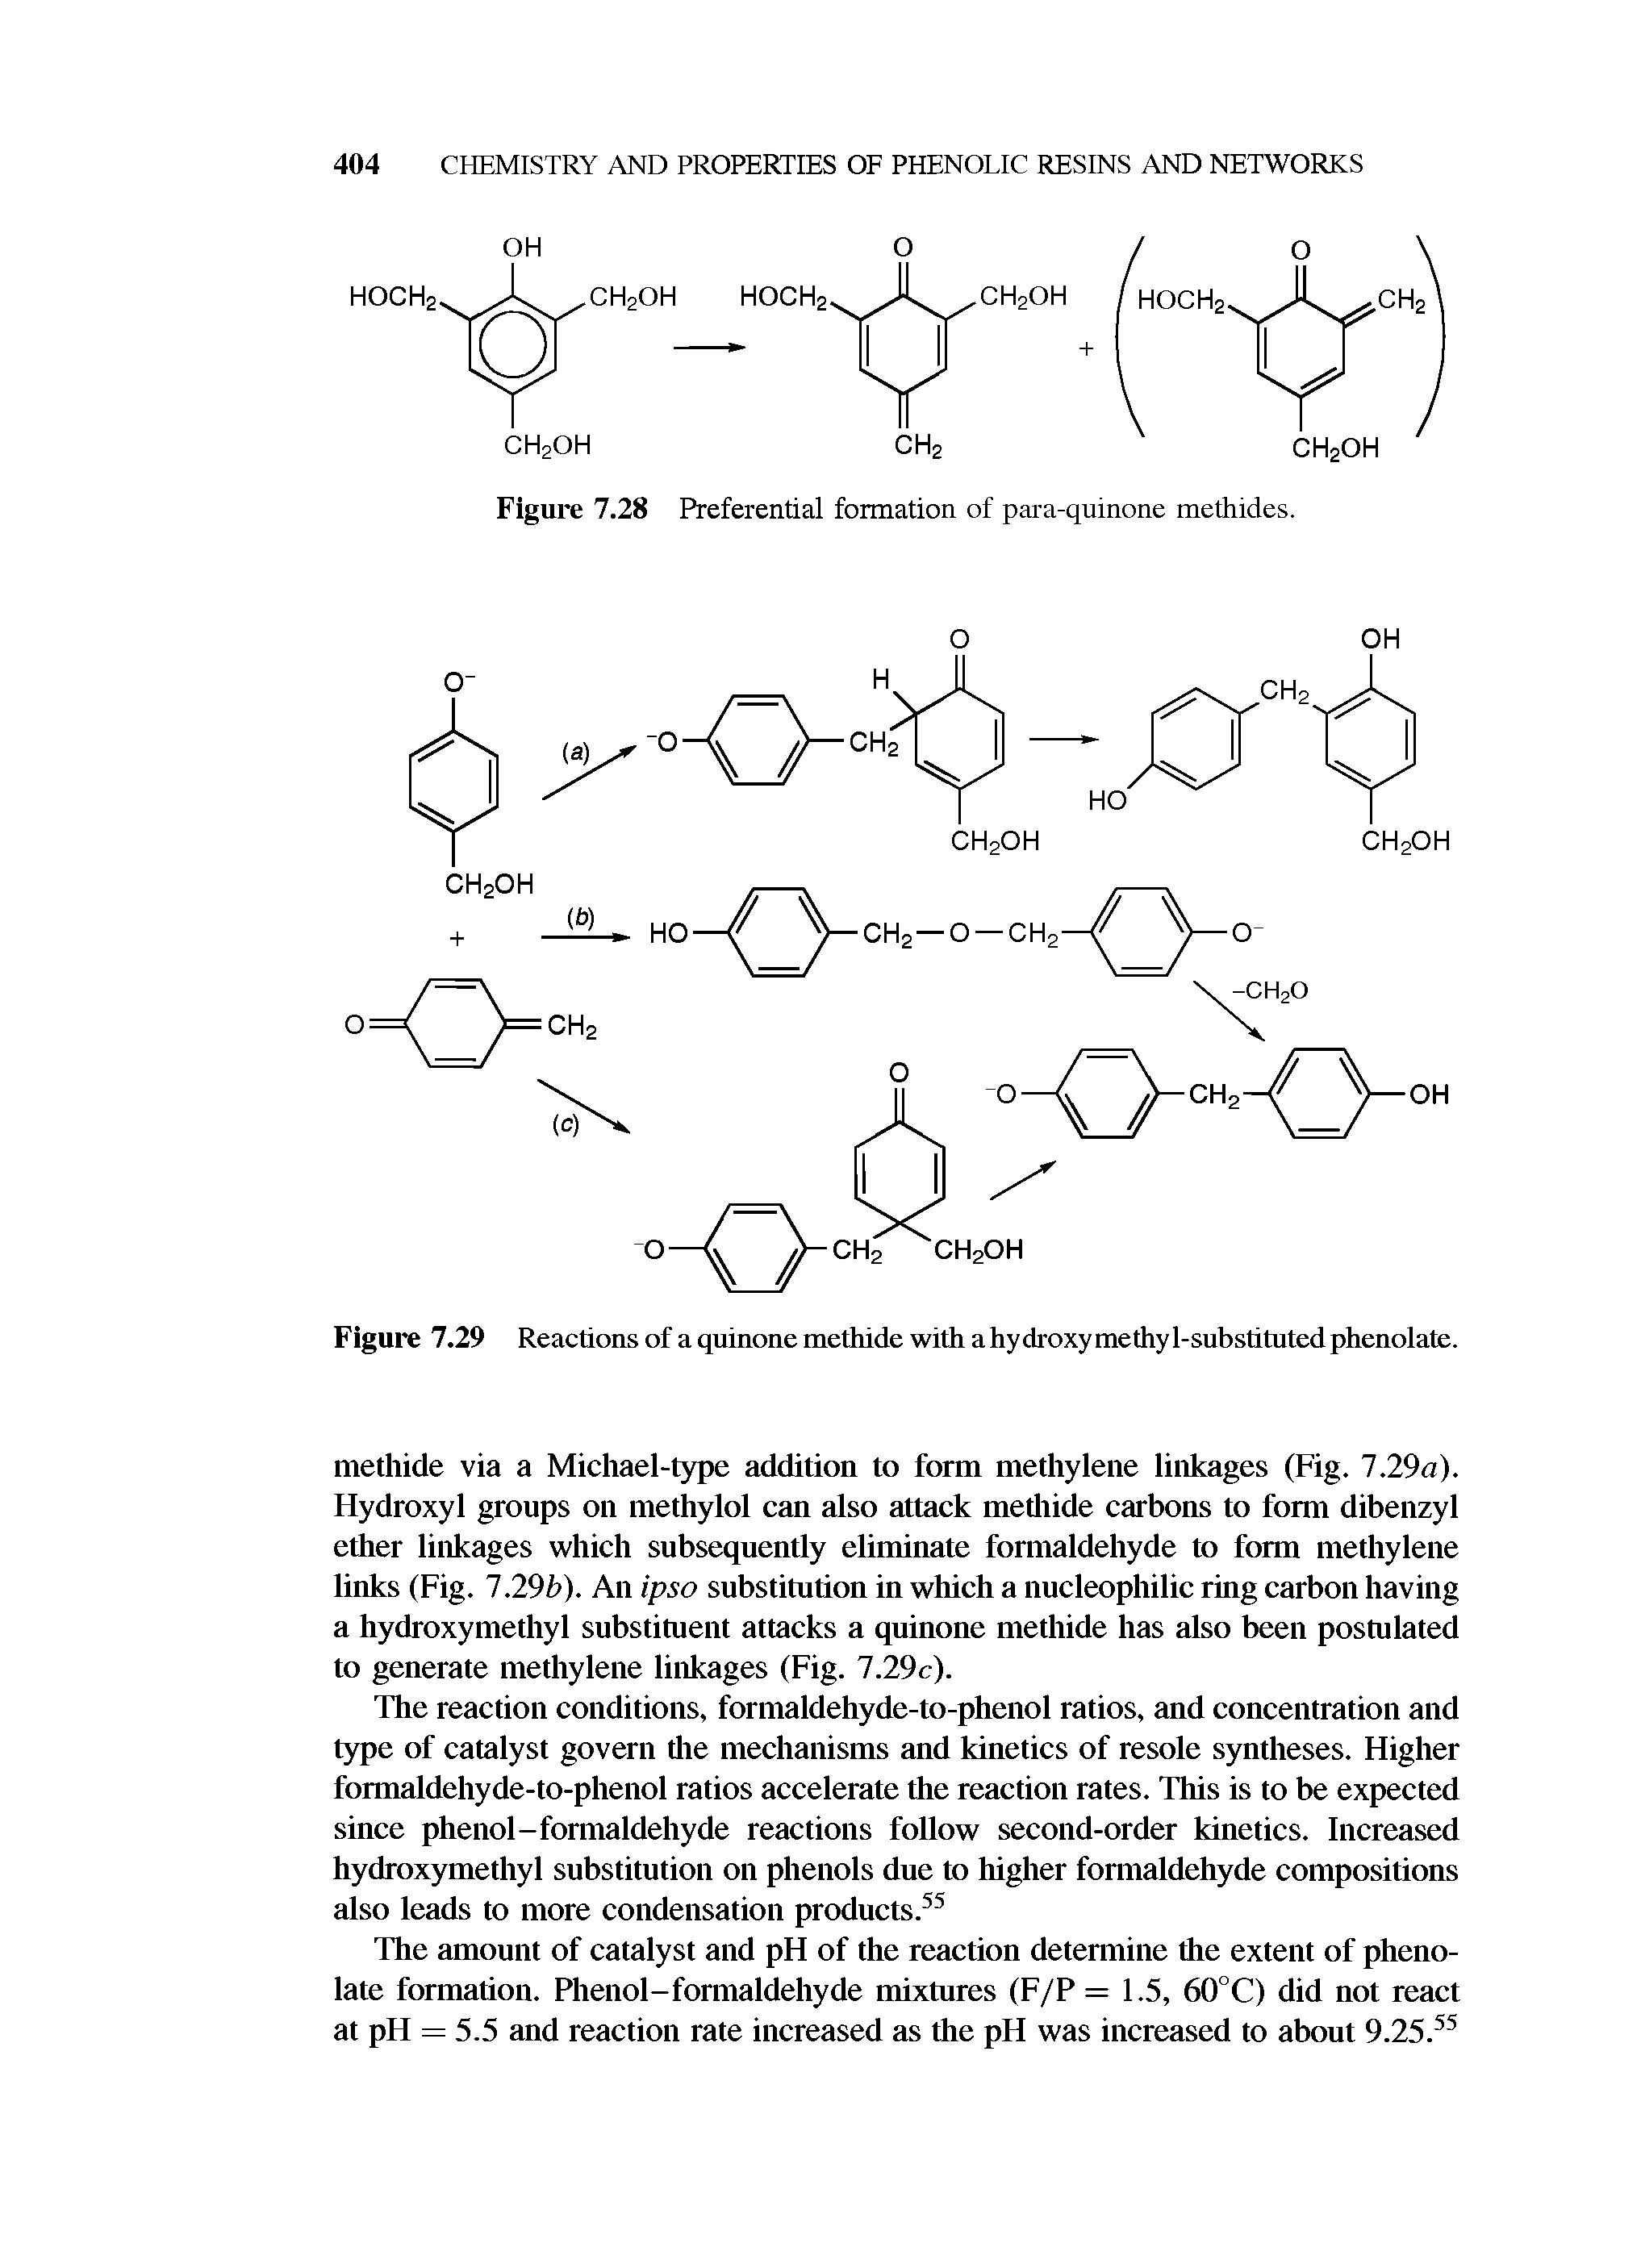 Figure 7.29 Reactions of a quinone methide with ahydroxymethyl-substitutedphenolate.